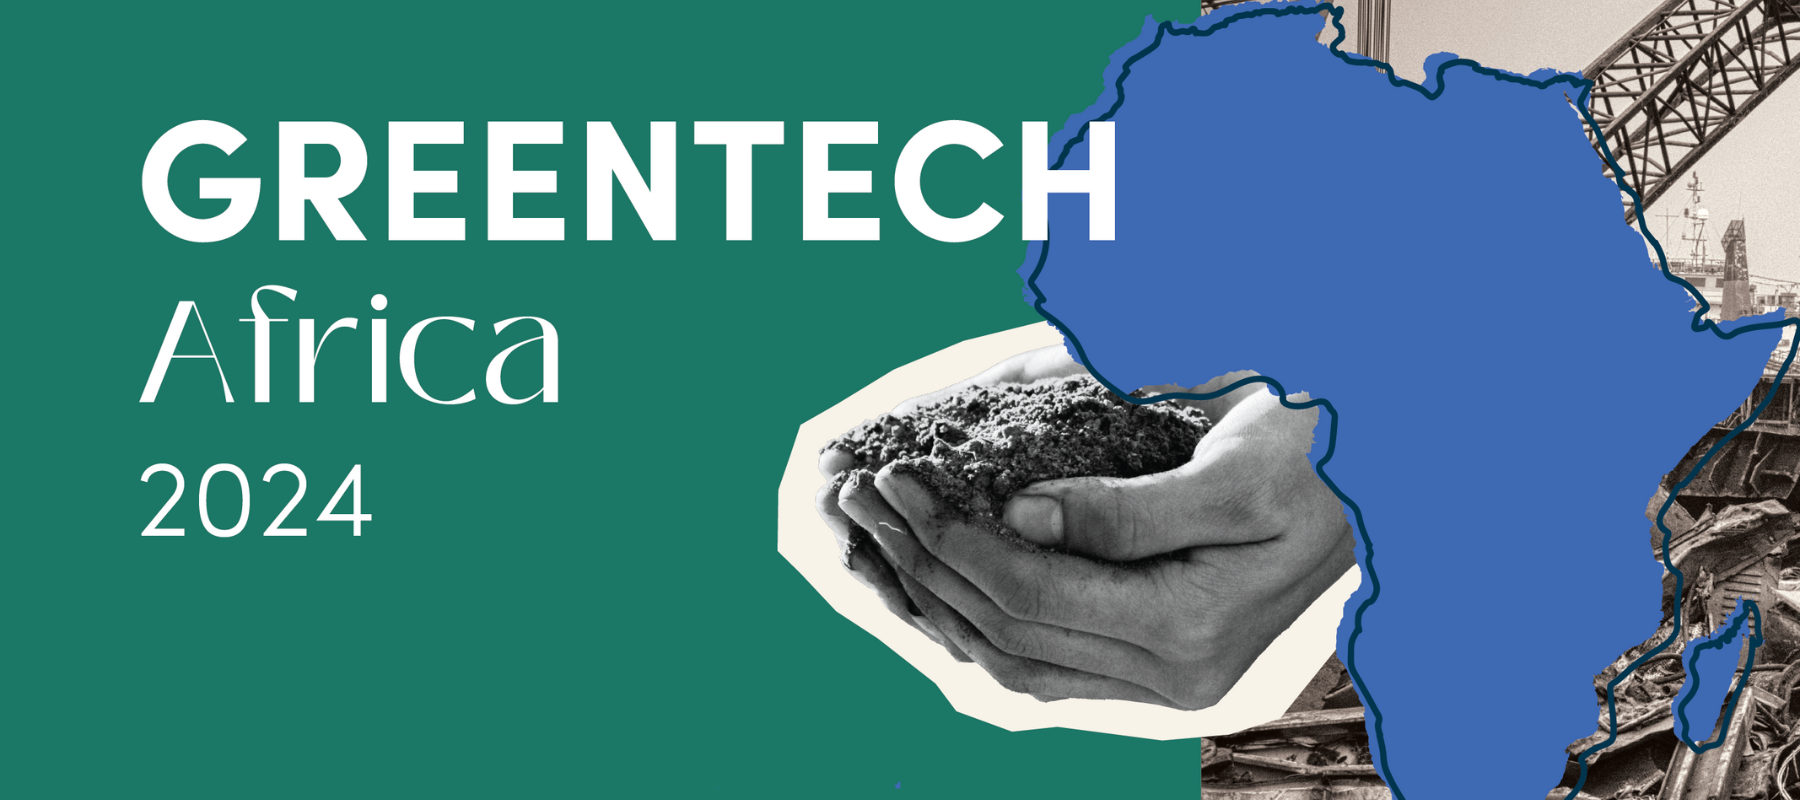 Village Capital opens call for greentech startups in Africa to mitigate the effects of climate change